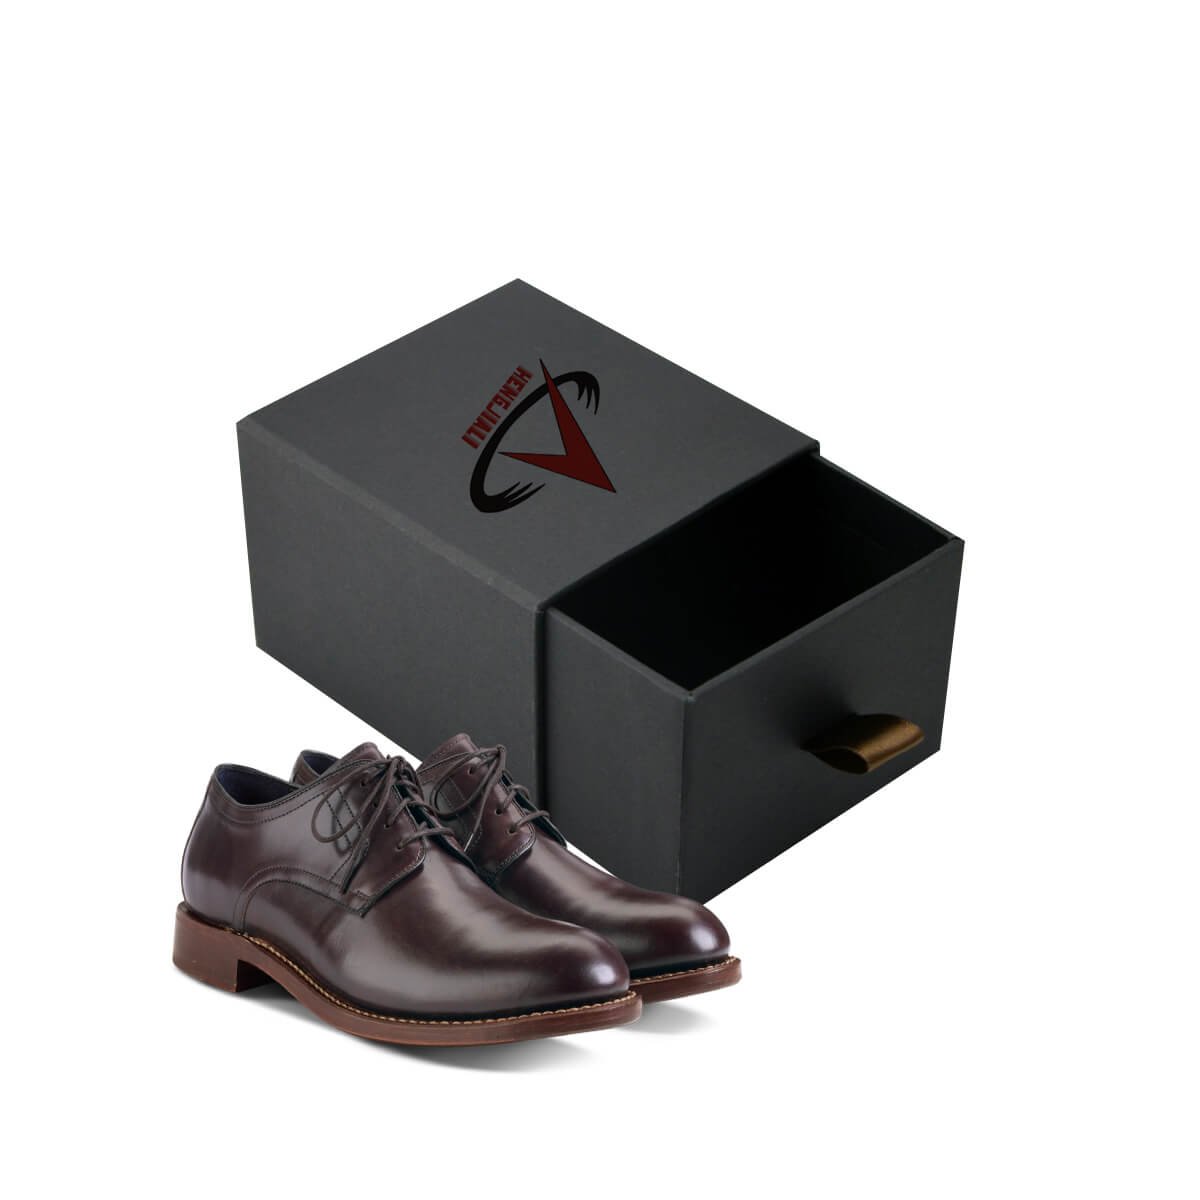 box leather shoes